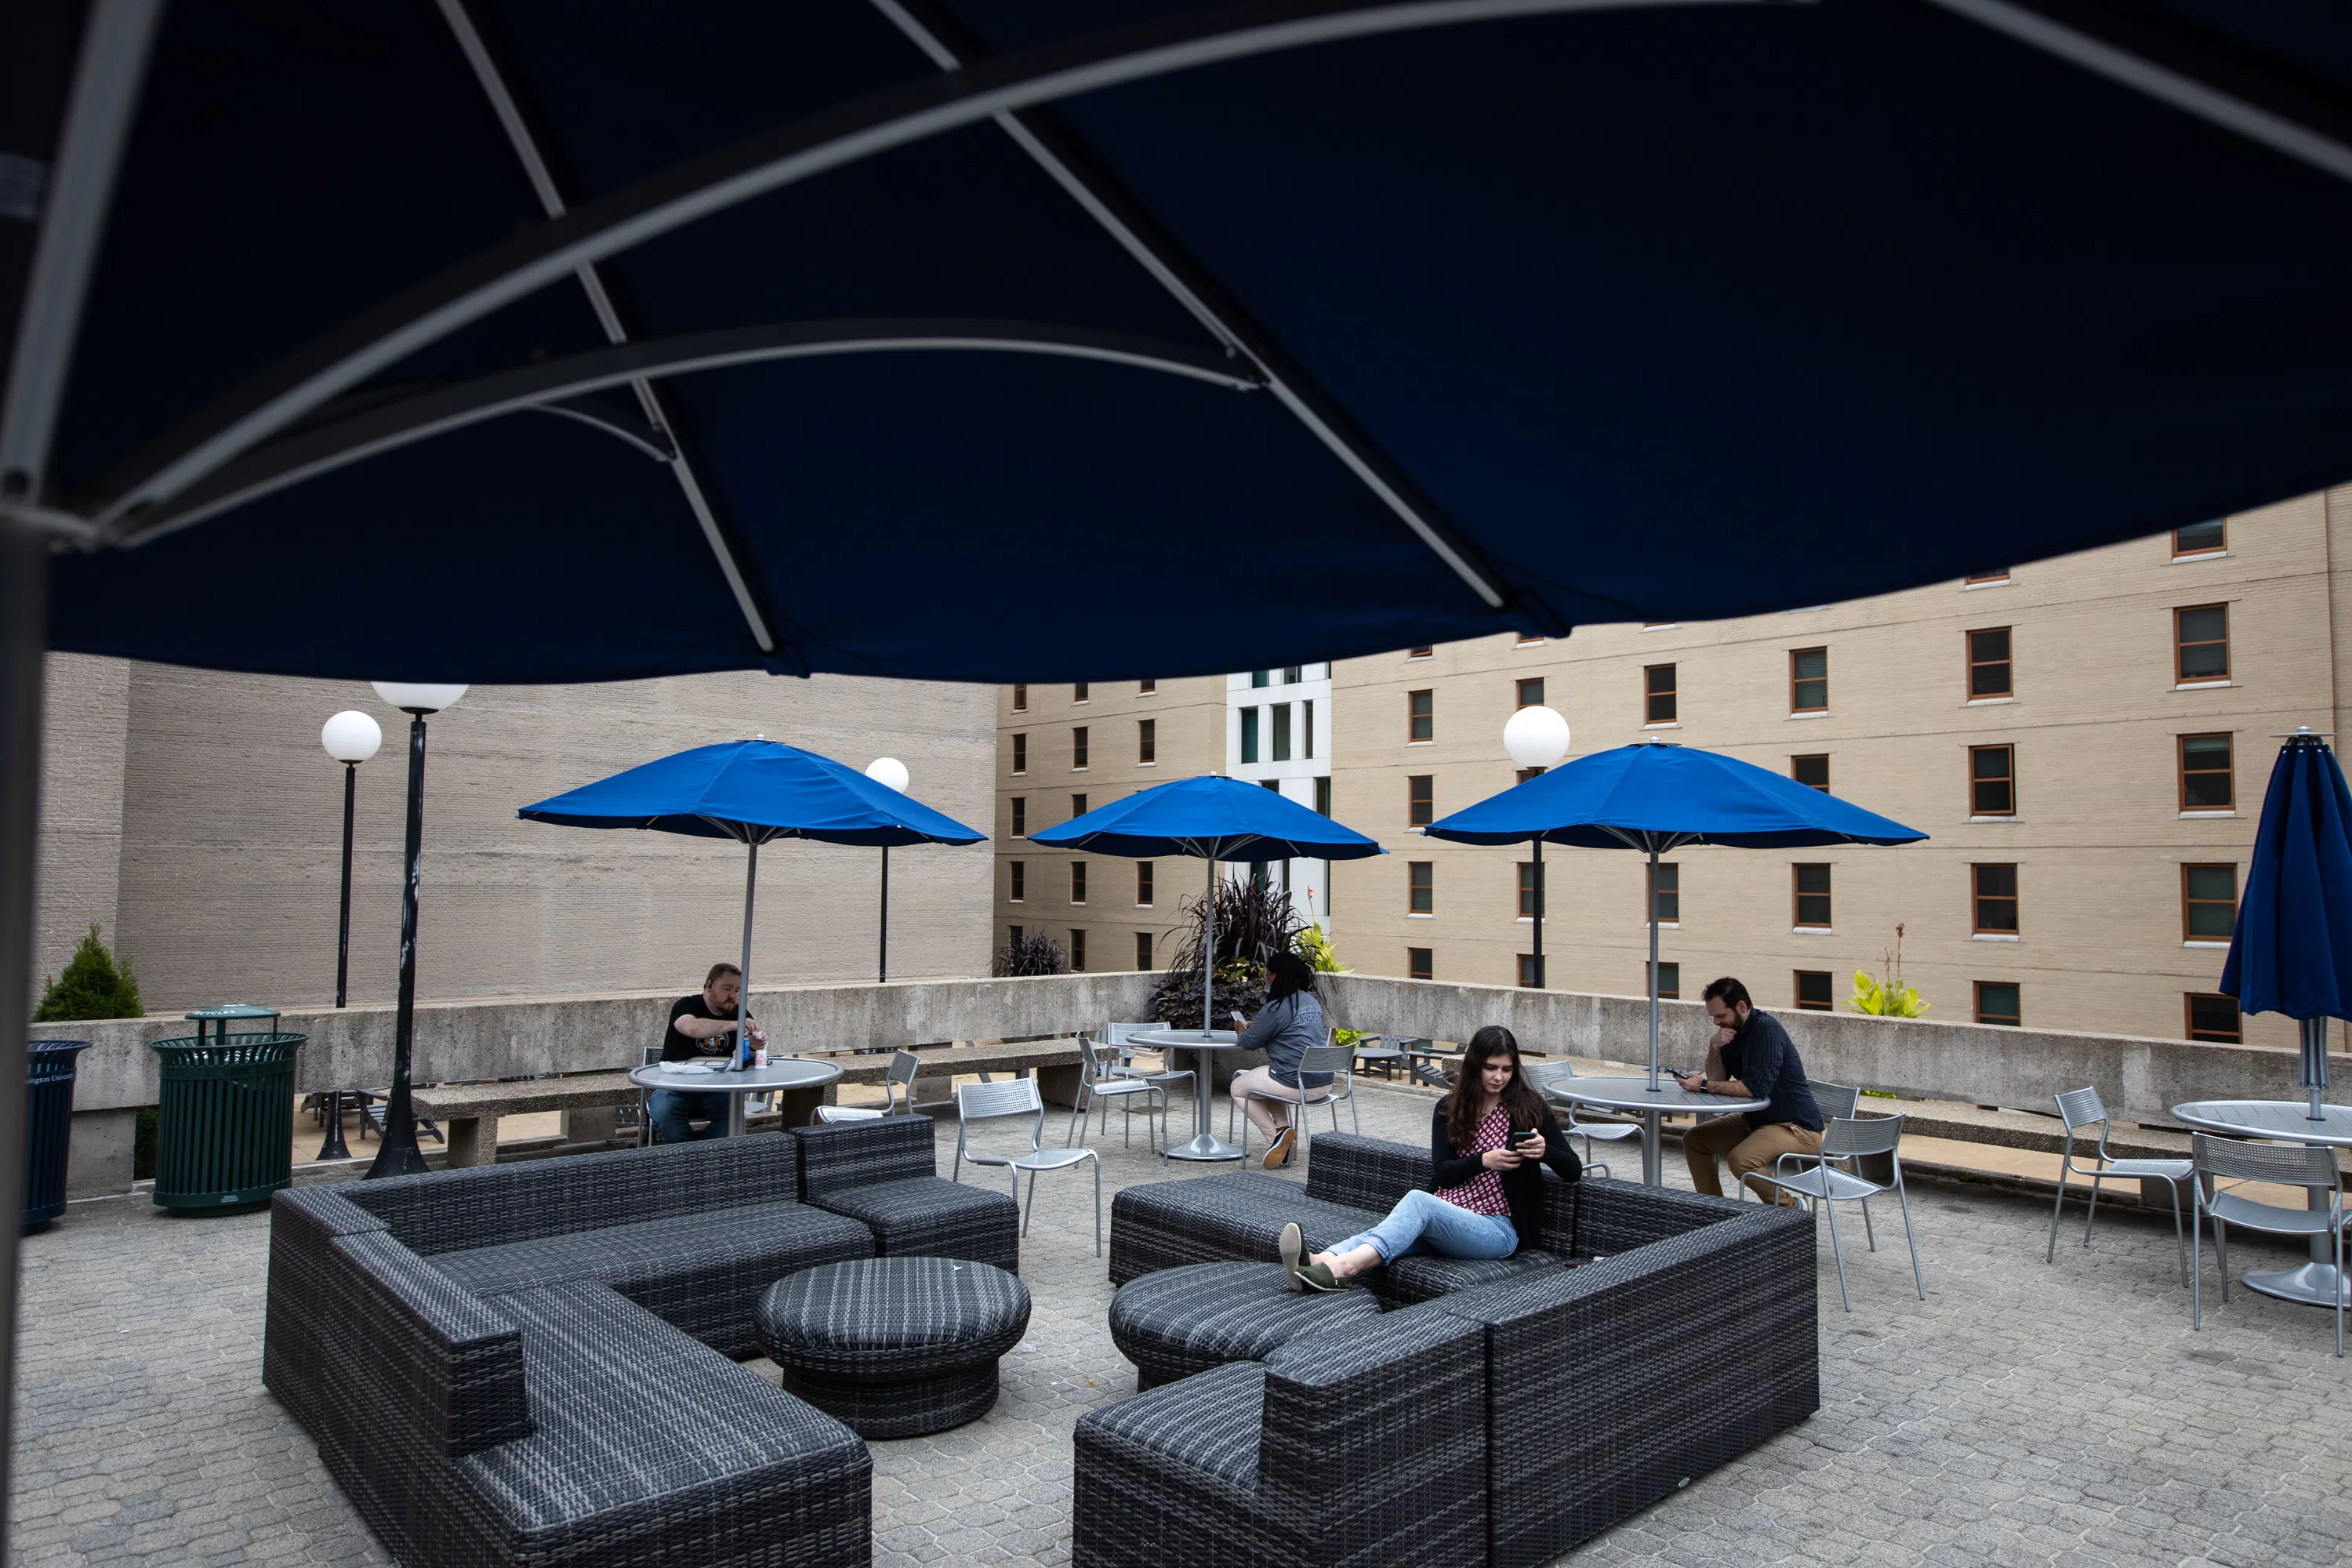 Students lounging on the rooftop patio of the University Student Center